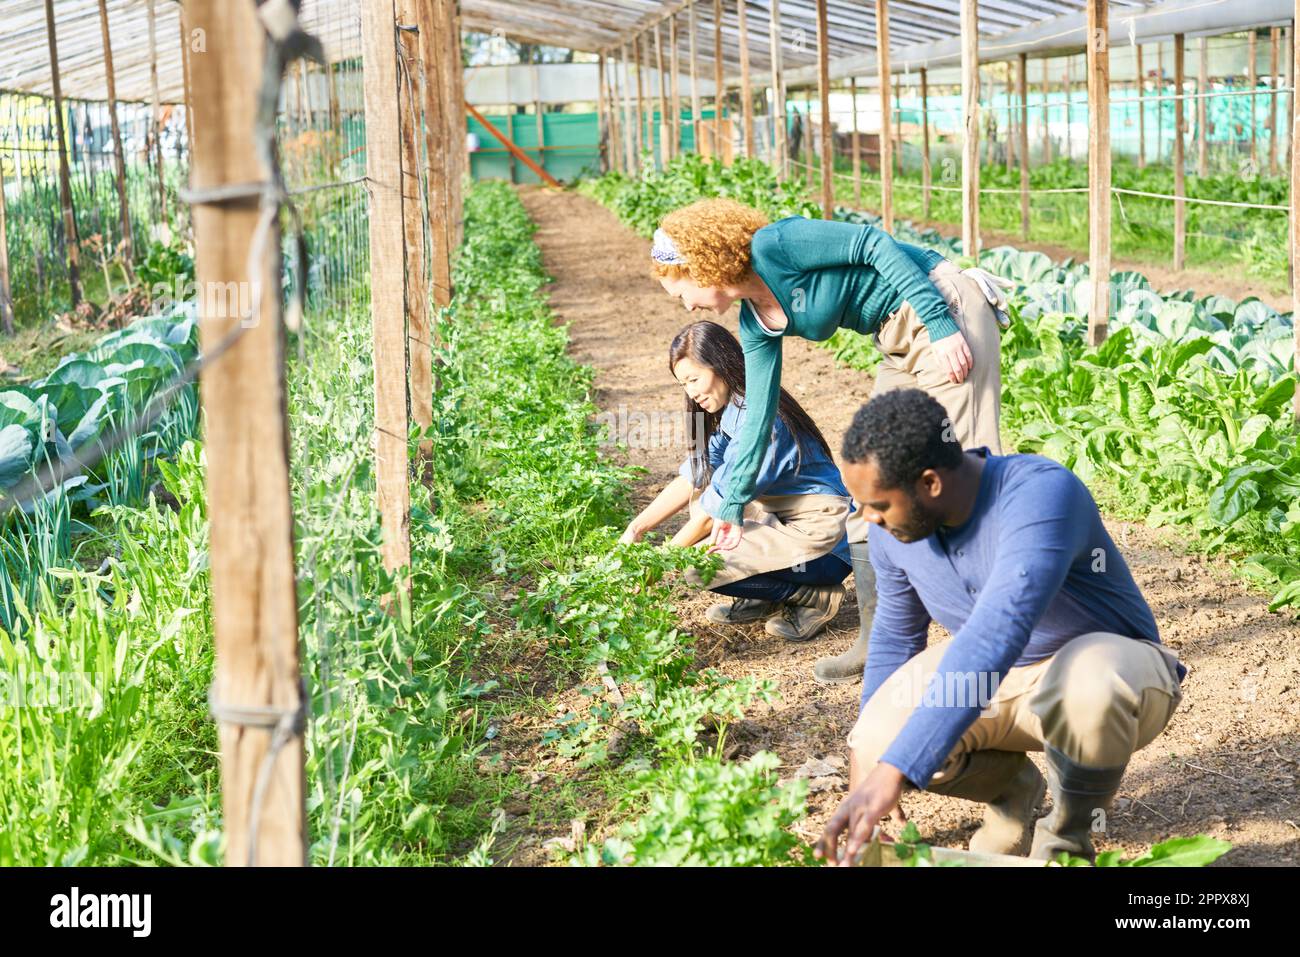 Farmer assisting coworkers harvesting vegetables while crouching in greenhouse Stock Photo